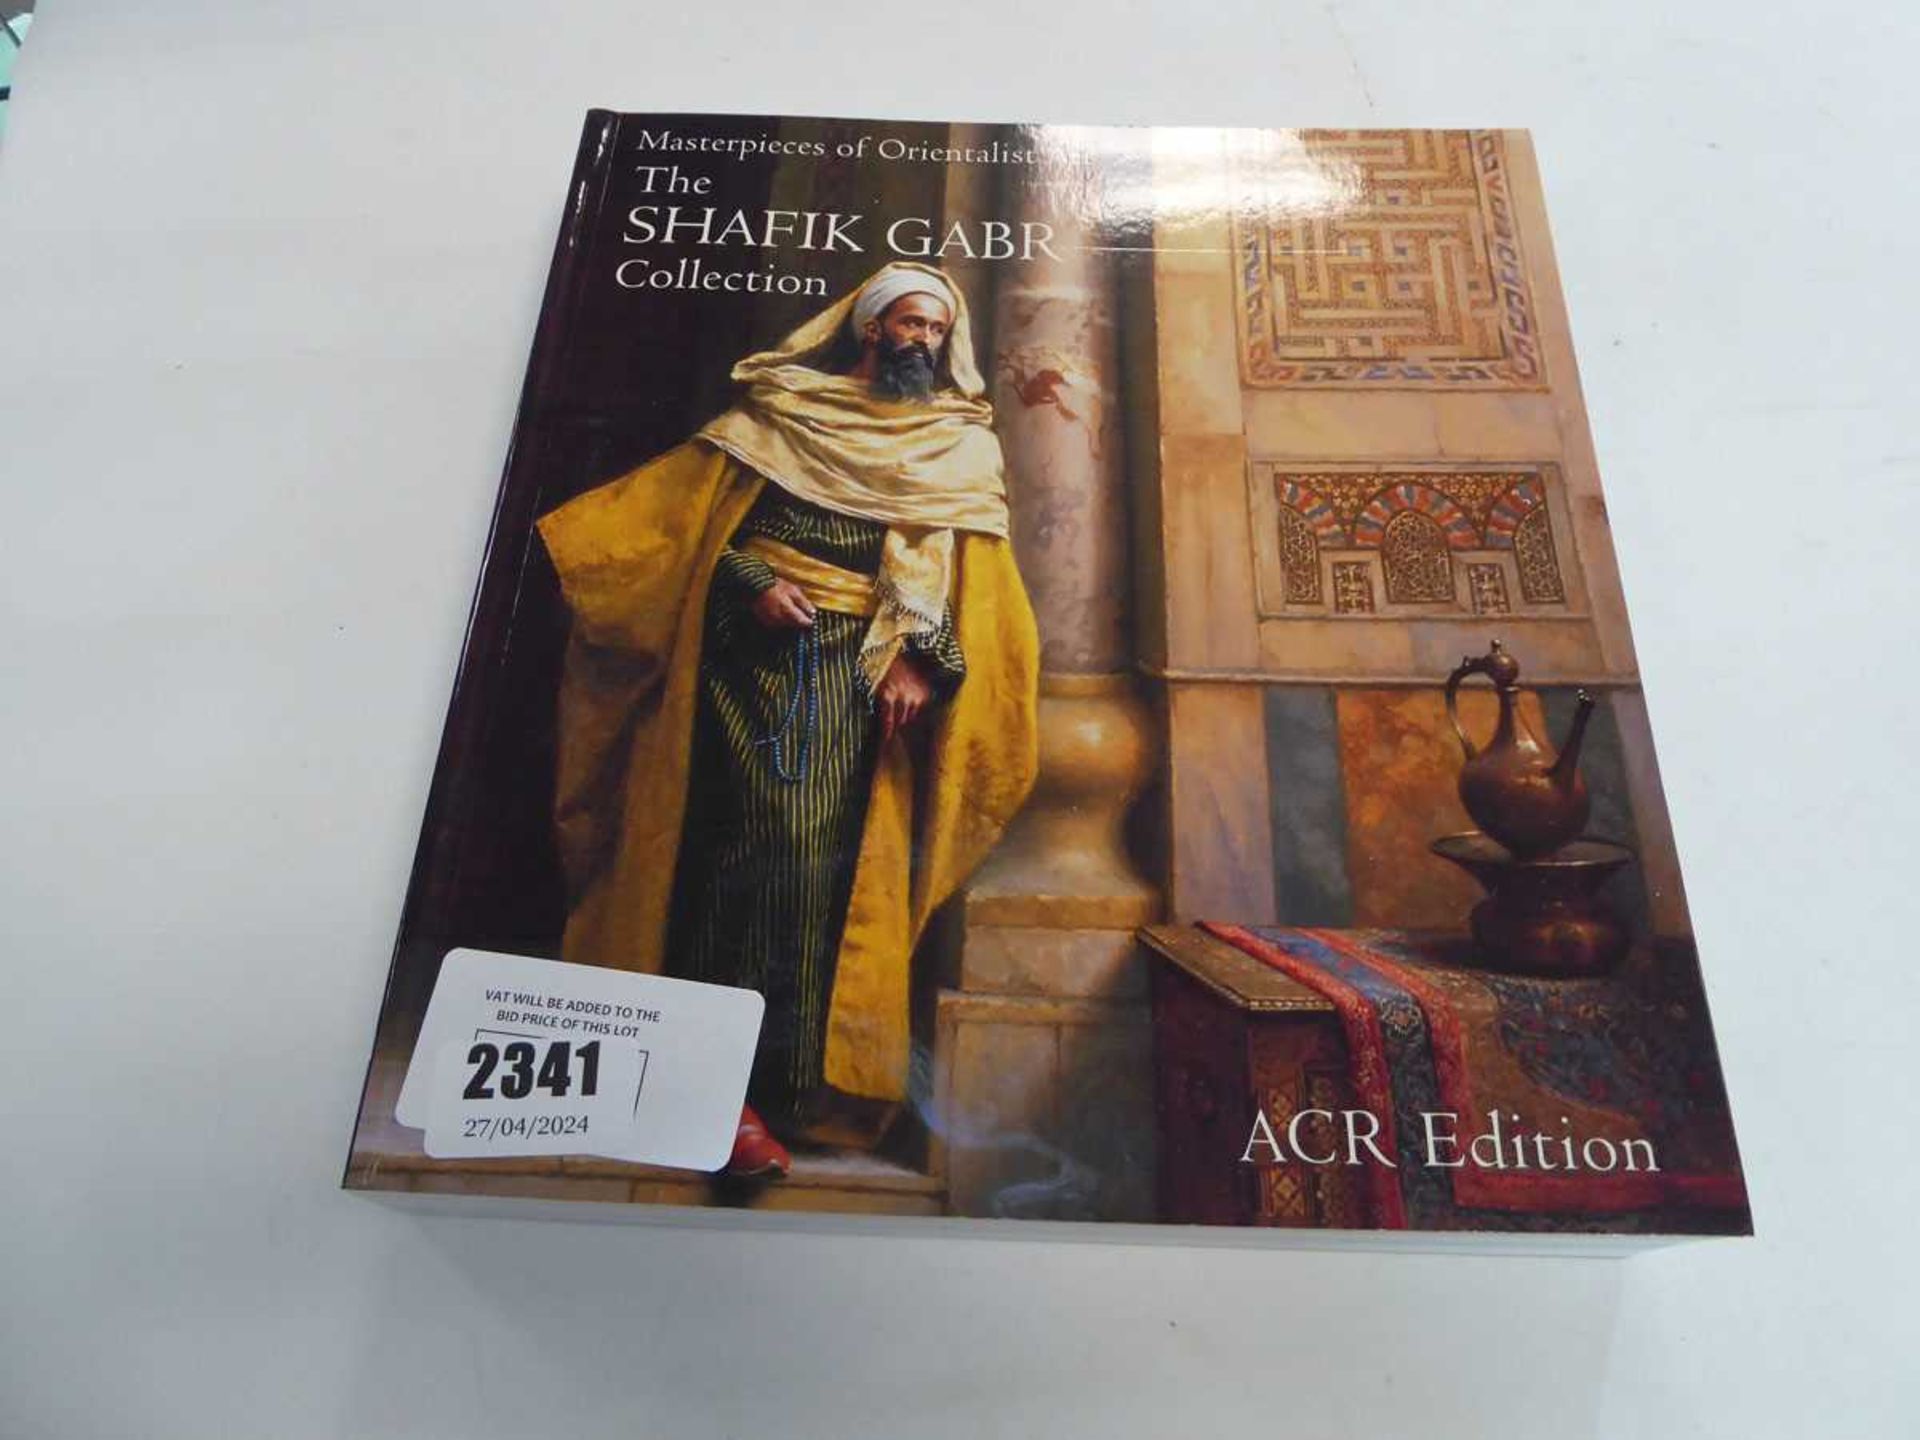 1 copy of Masterpieces of Orientalist Art: The Shafik Gabr Collection by Gerald M. Ackerman and